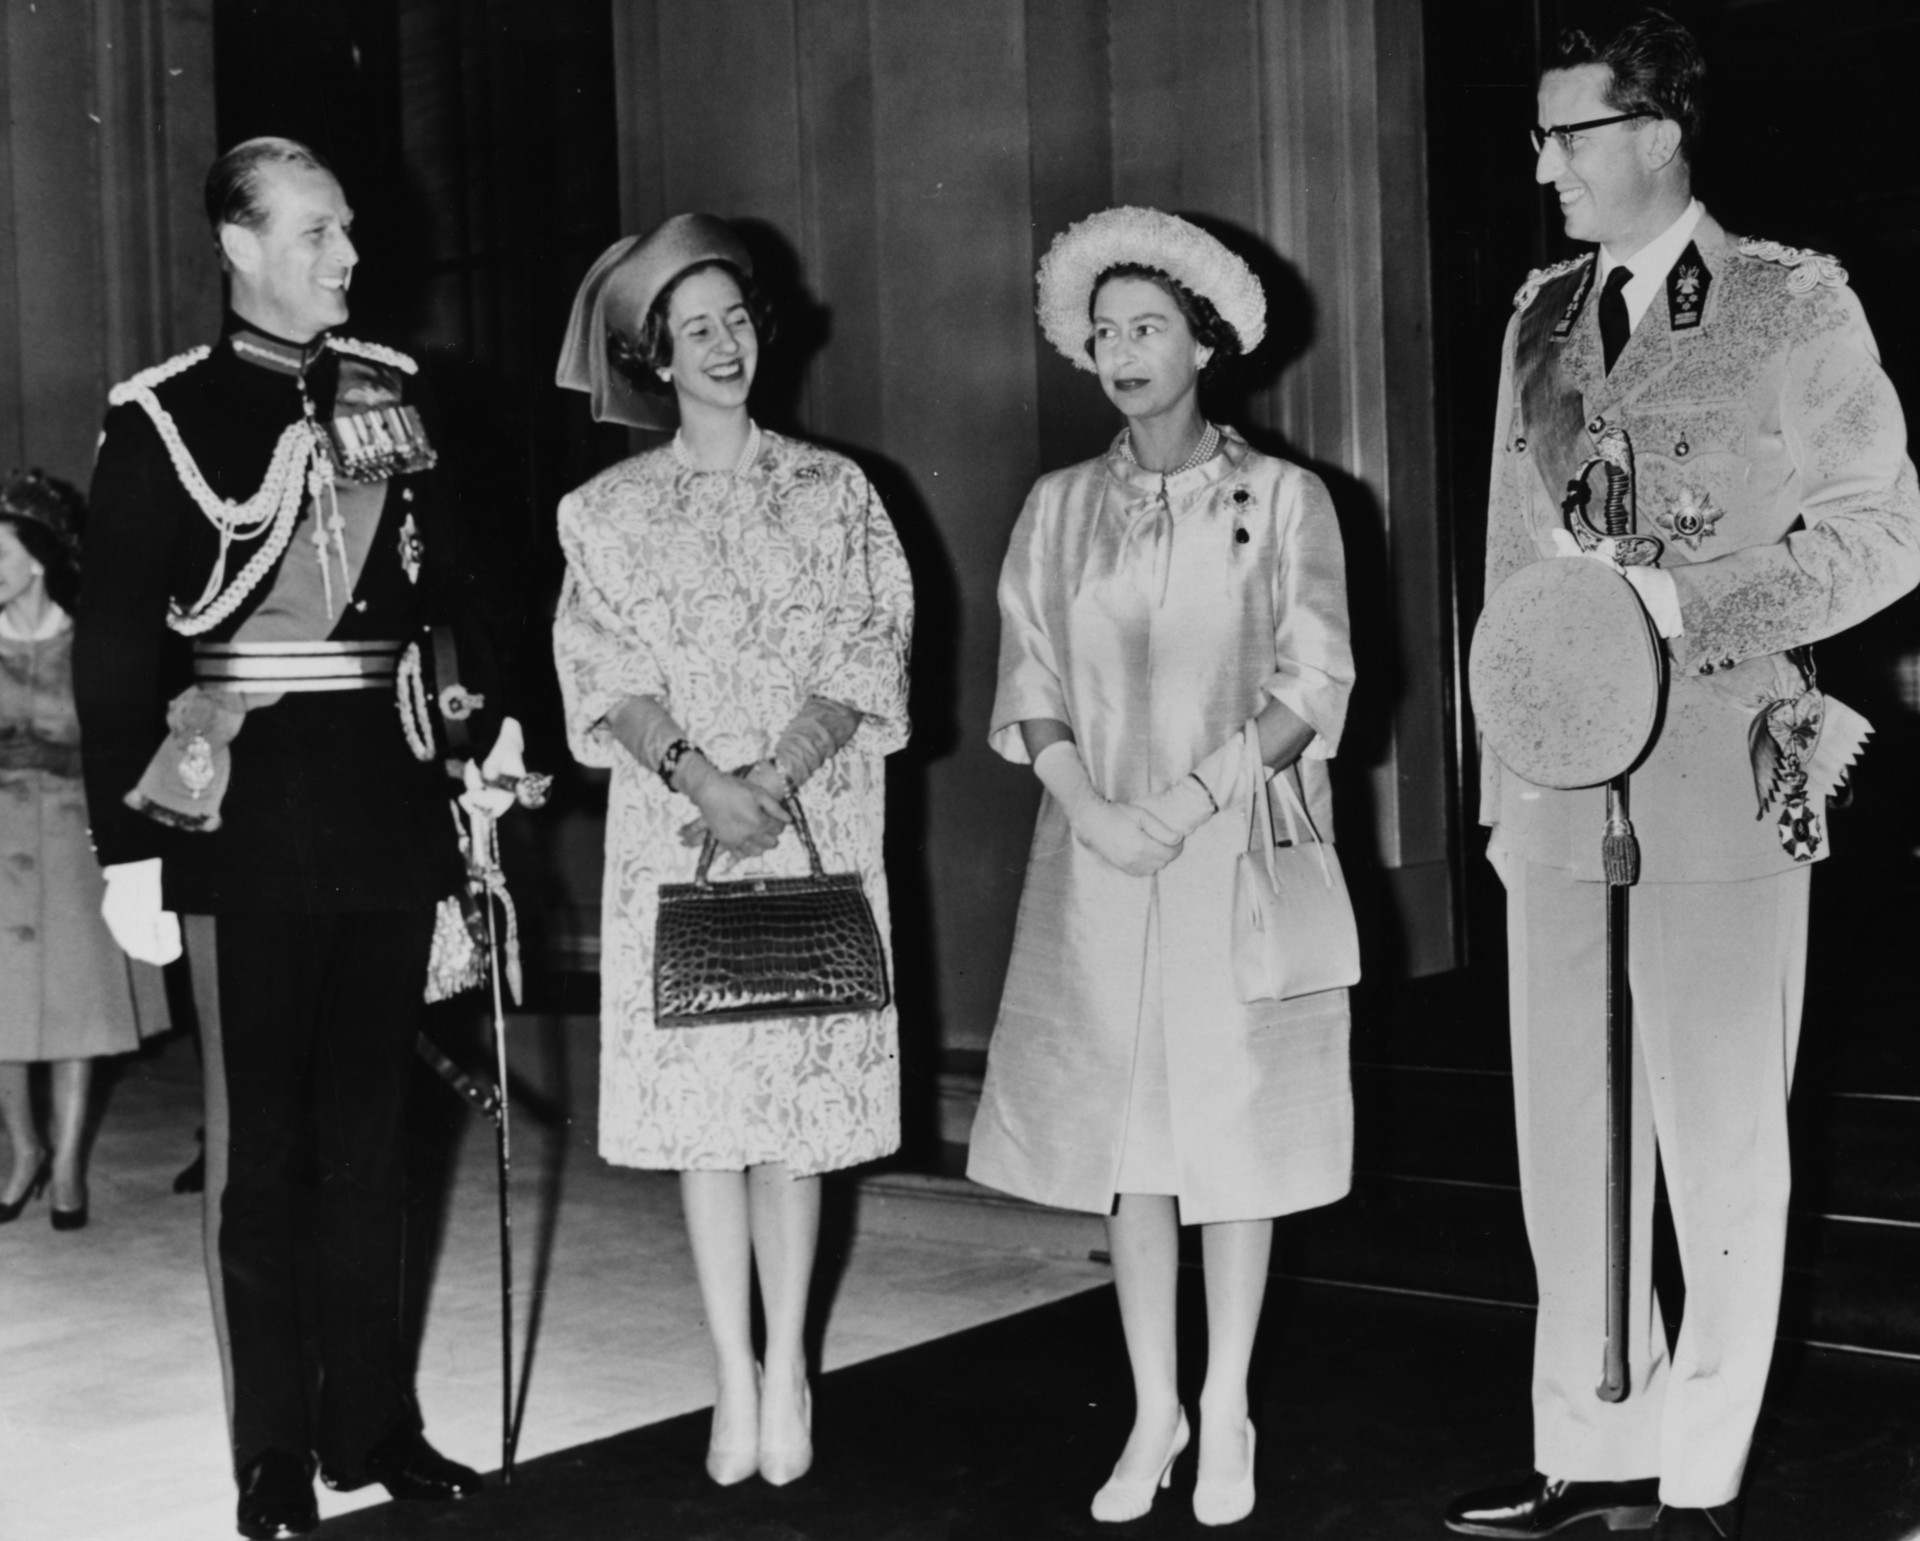 With Queen Fabiola and King Baudouin of Belgium.<p>You may also like:<a href="https://www.starsinsider.com/n/369281?utm_source=msn.com&utm_medium=display&utm_campaign=referral_description&utm_content=202921v11en-nz"> Incredible historic images of D-Day</a></p>